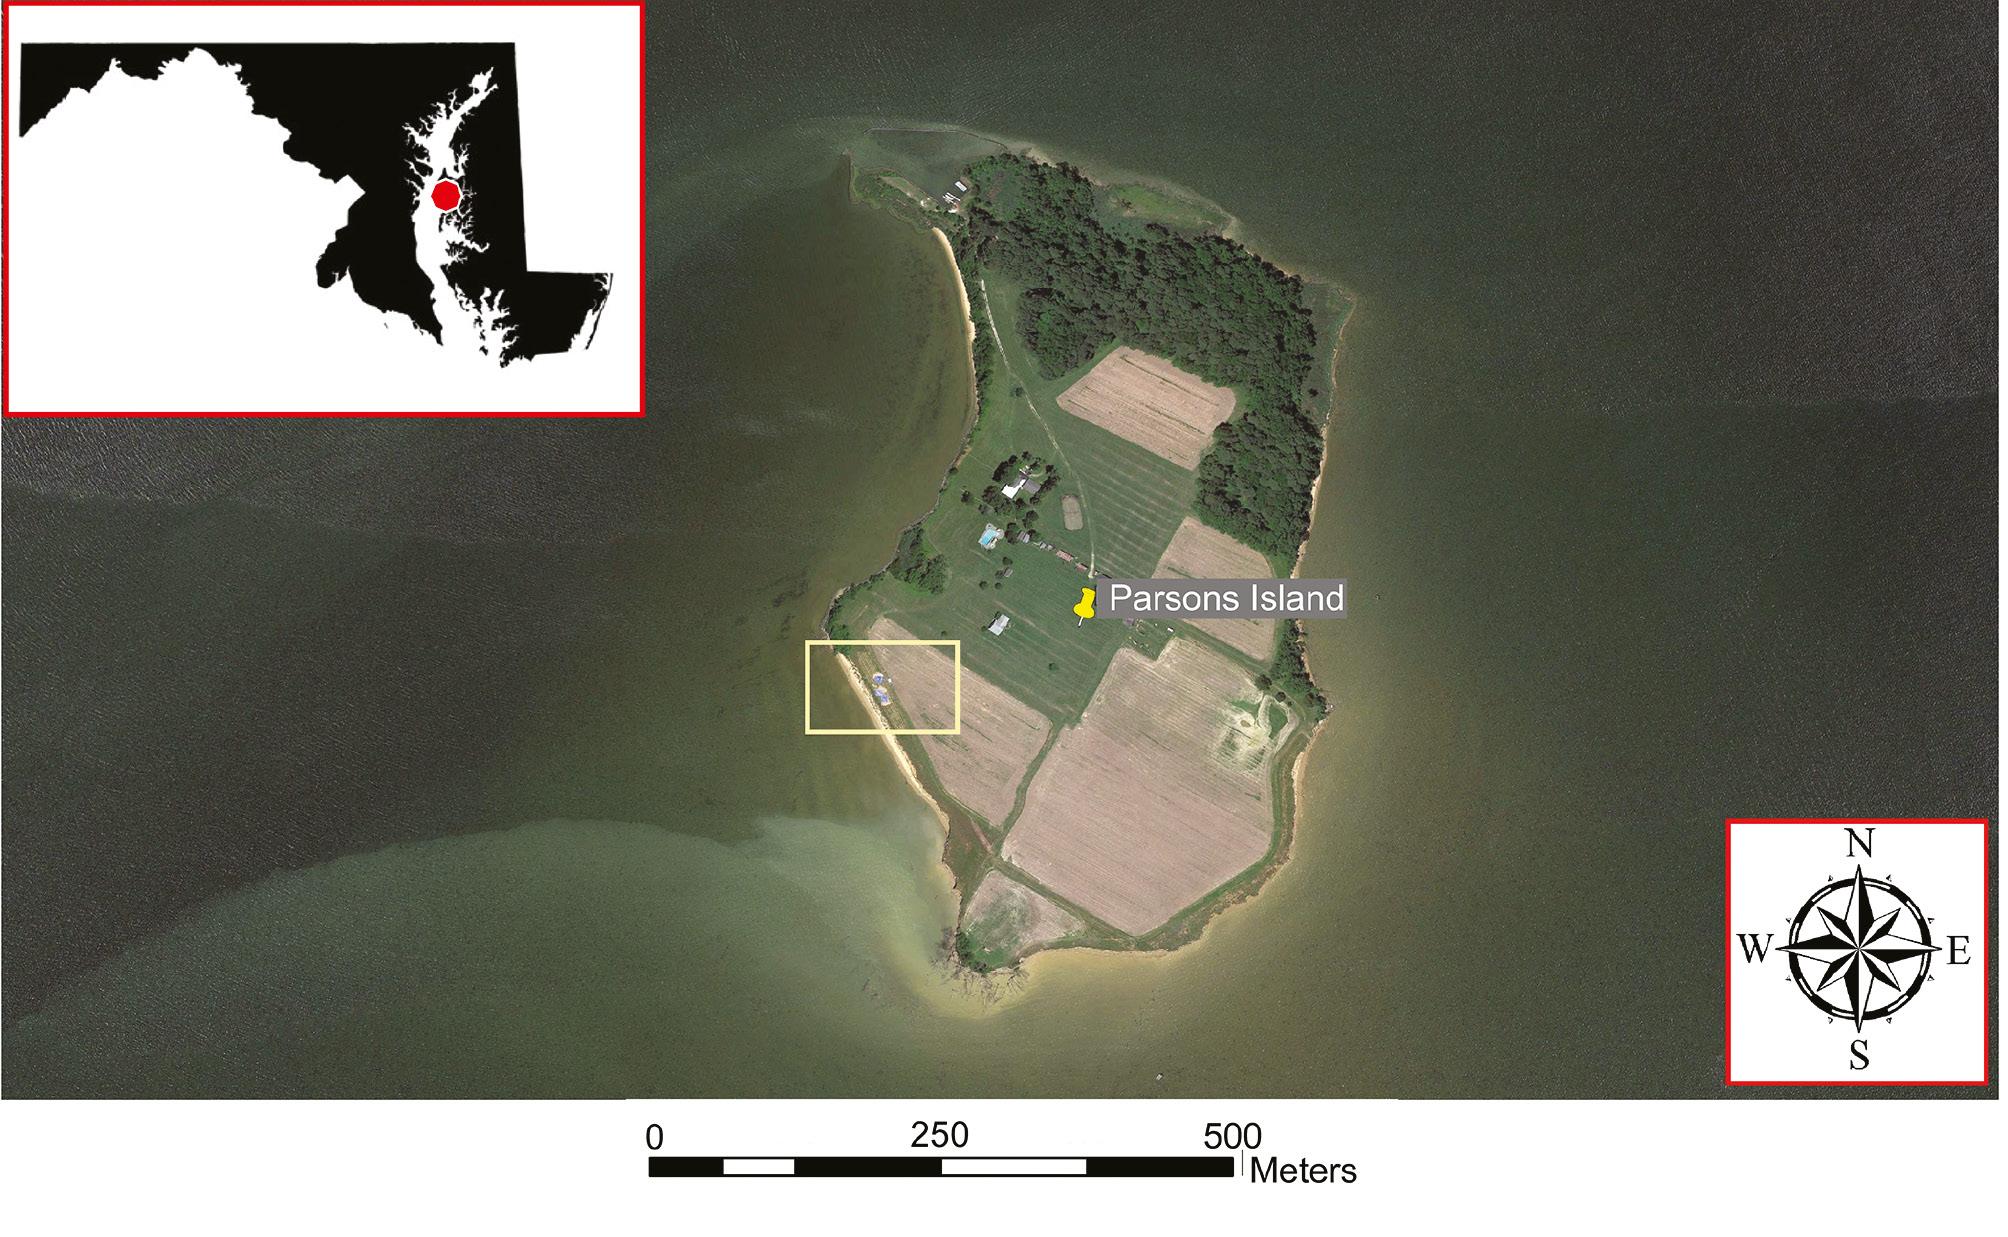 Area sampled at Parsons Island in the Chesapeake Bay, Maryland. The image was created using Google Earth and Canvas 11 (Build 1252) software. The yellow rectangle indicates the area of the bluff sampled.